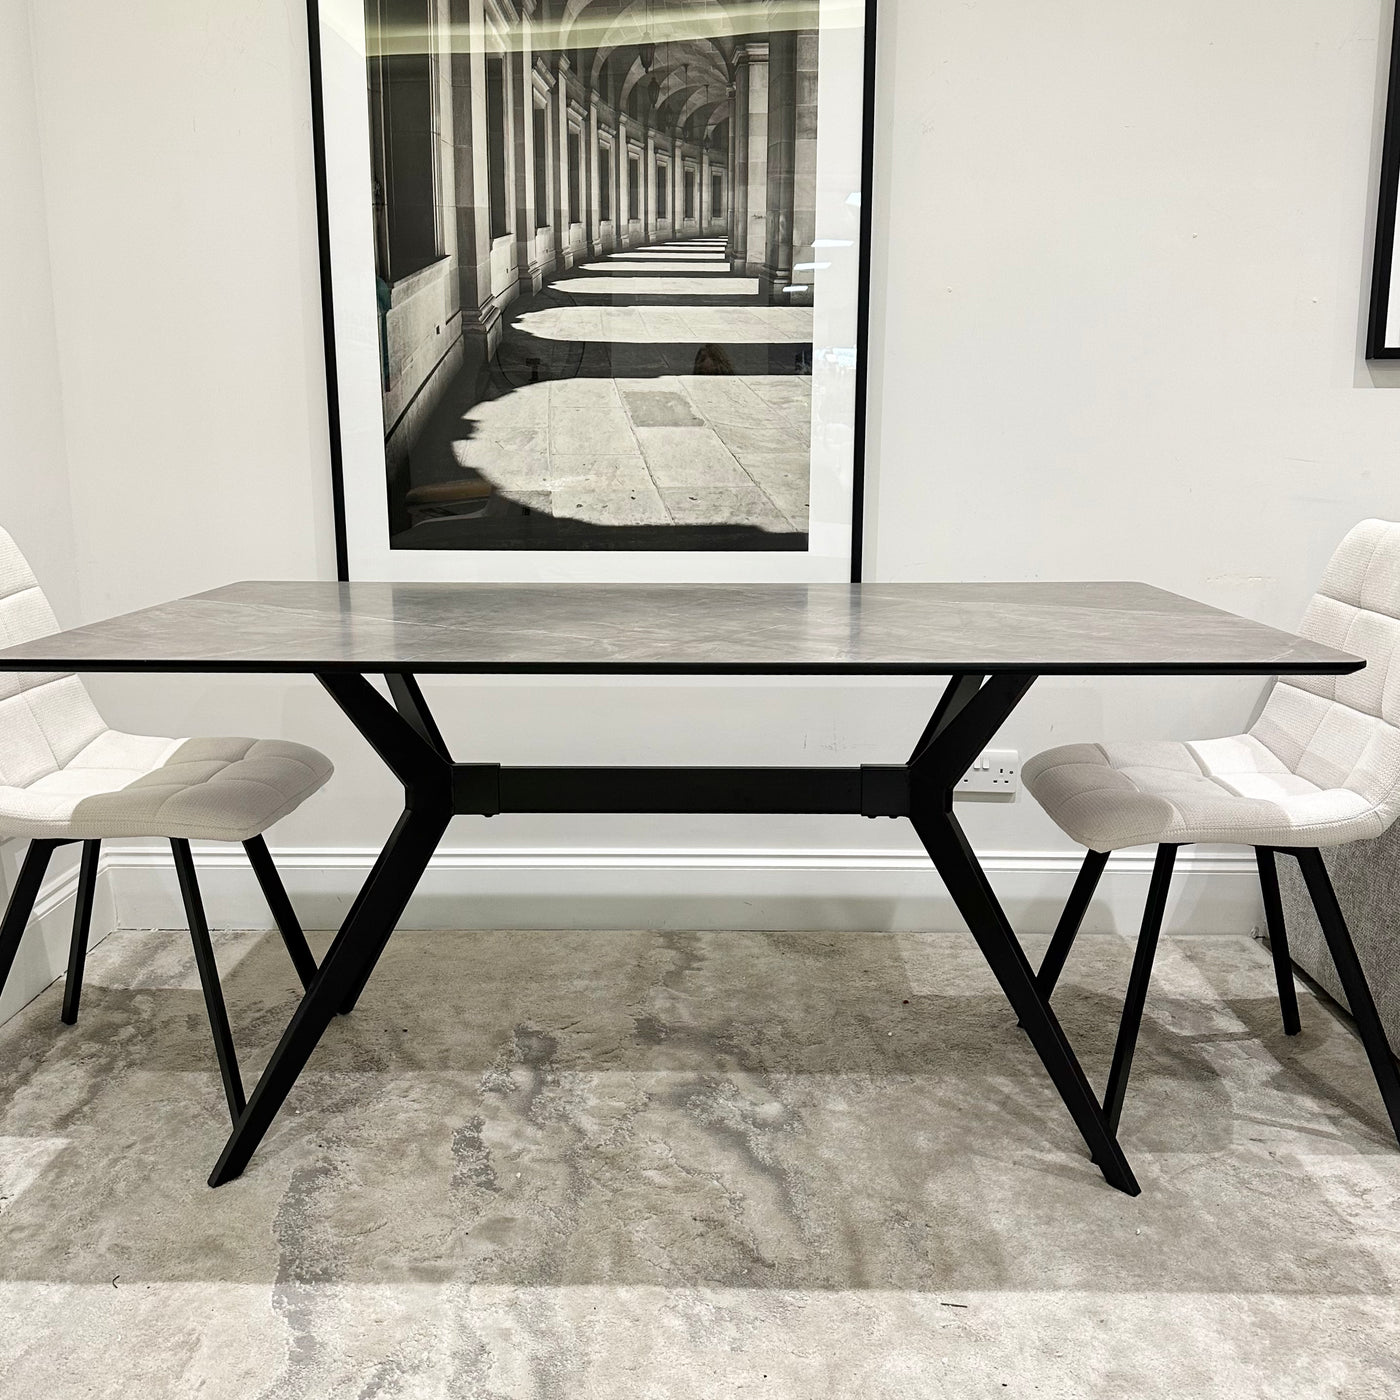 Mares Rectangular Dining Table